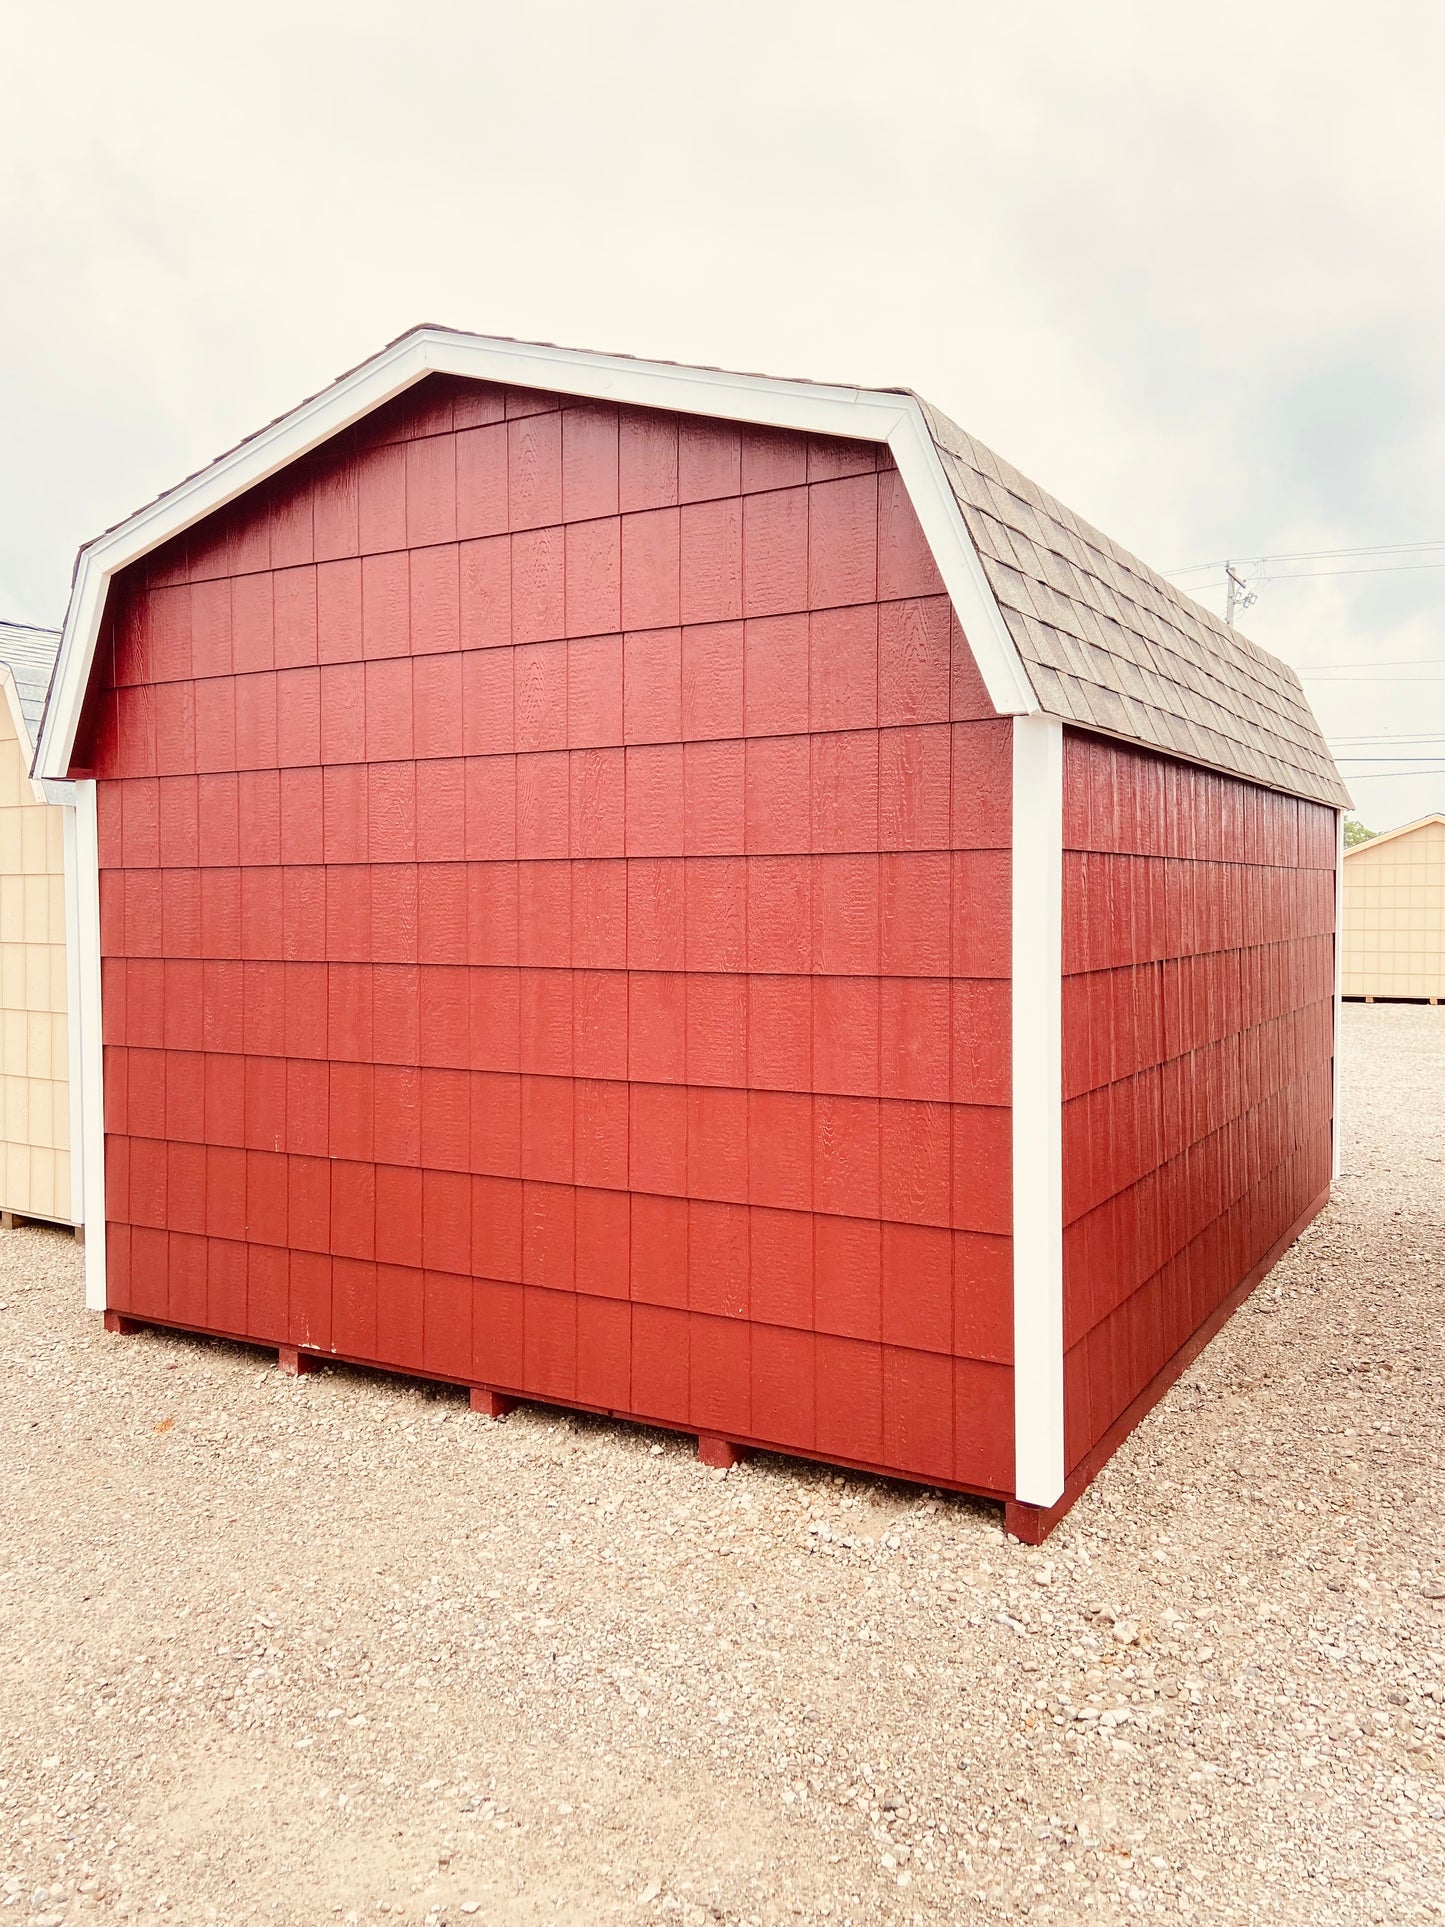 12x16 Special Buy Gambrel Barn with 18" Lap Siding & 6' sidewalls - w/PAINT - BACK